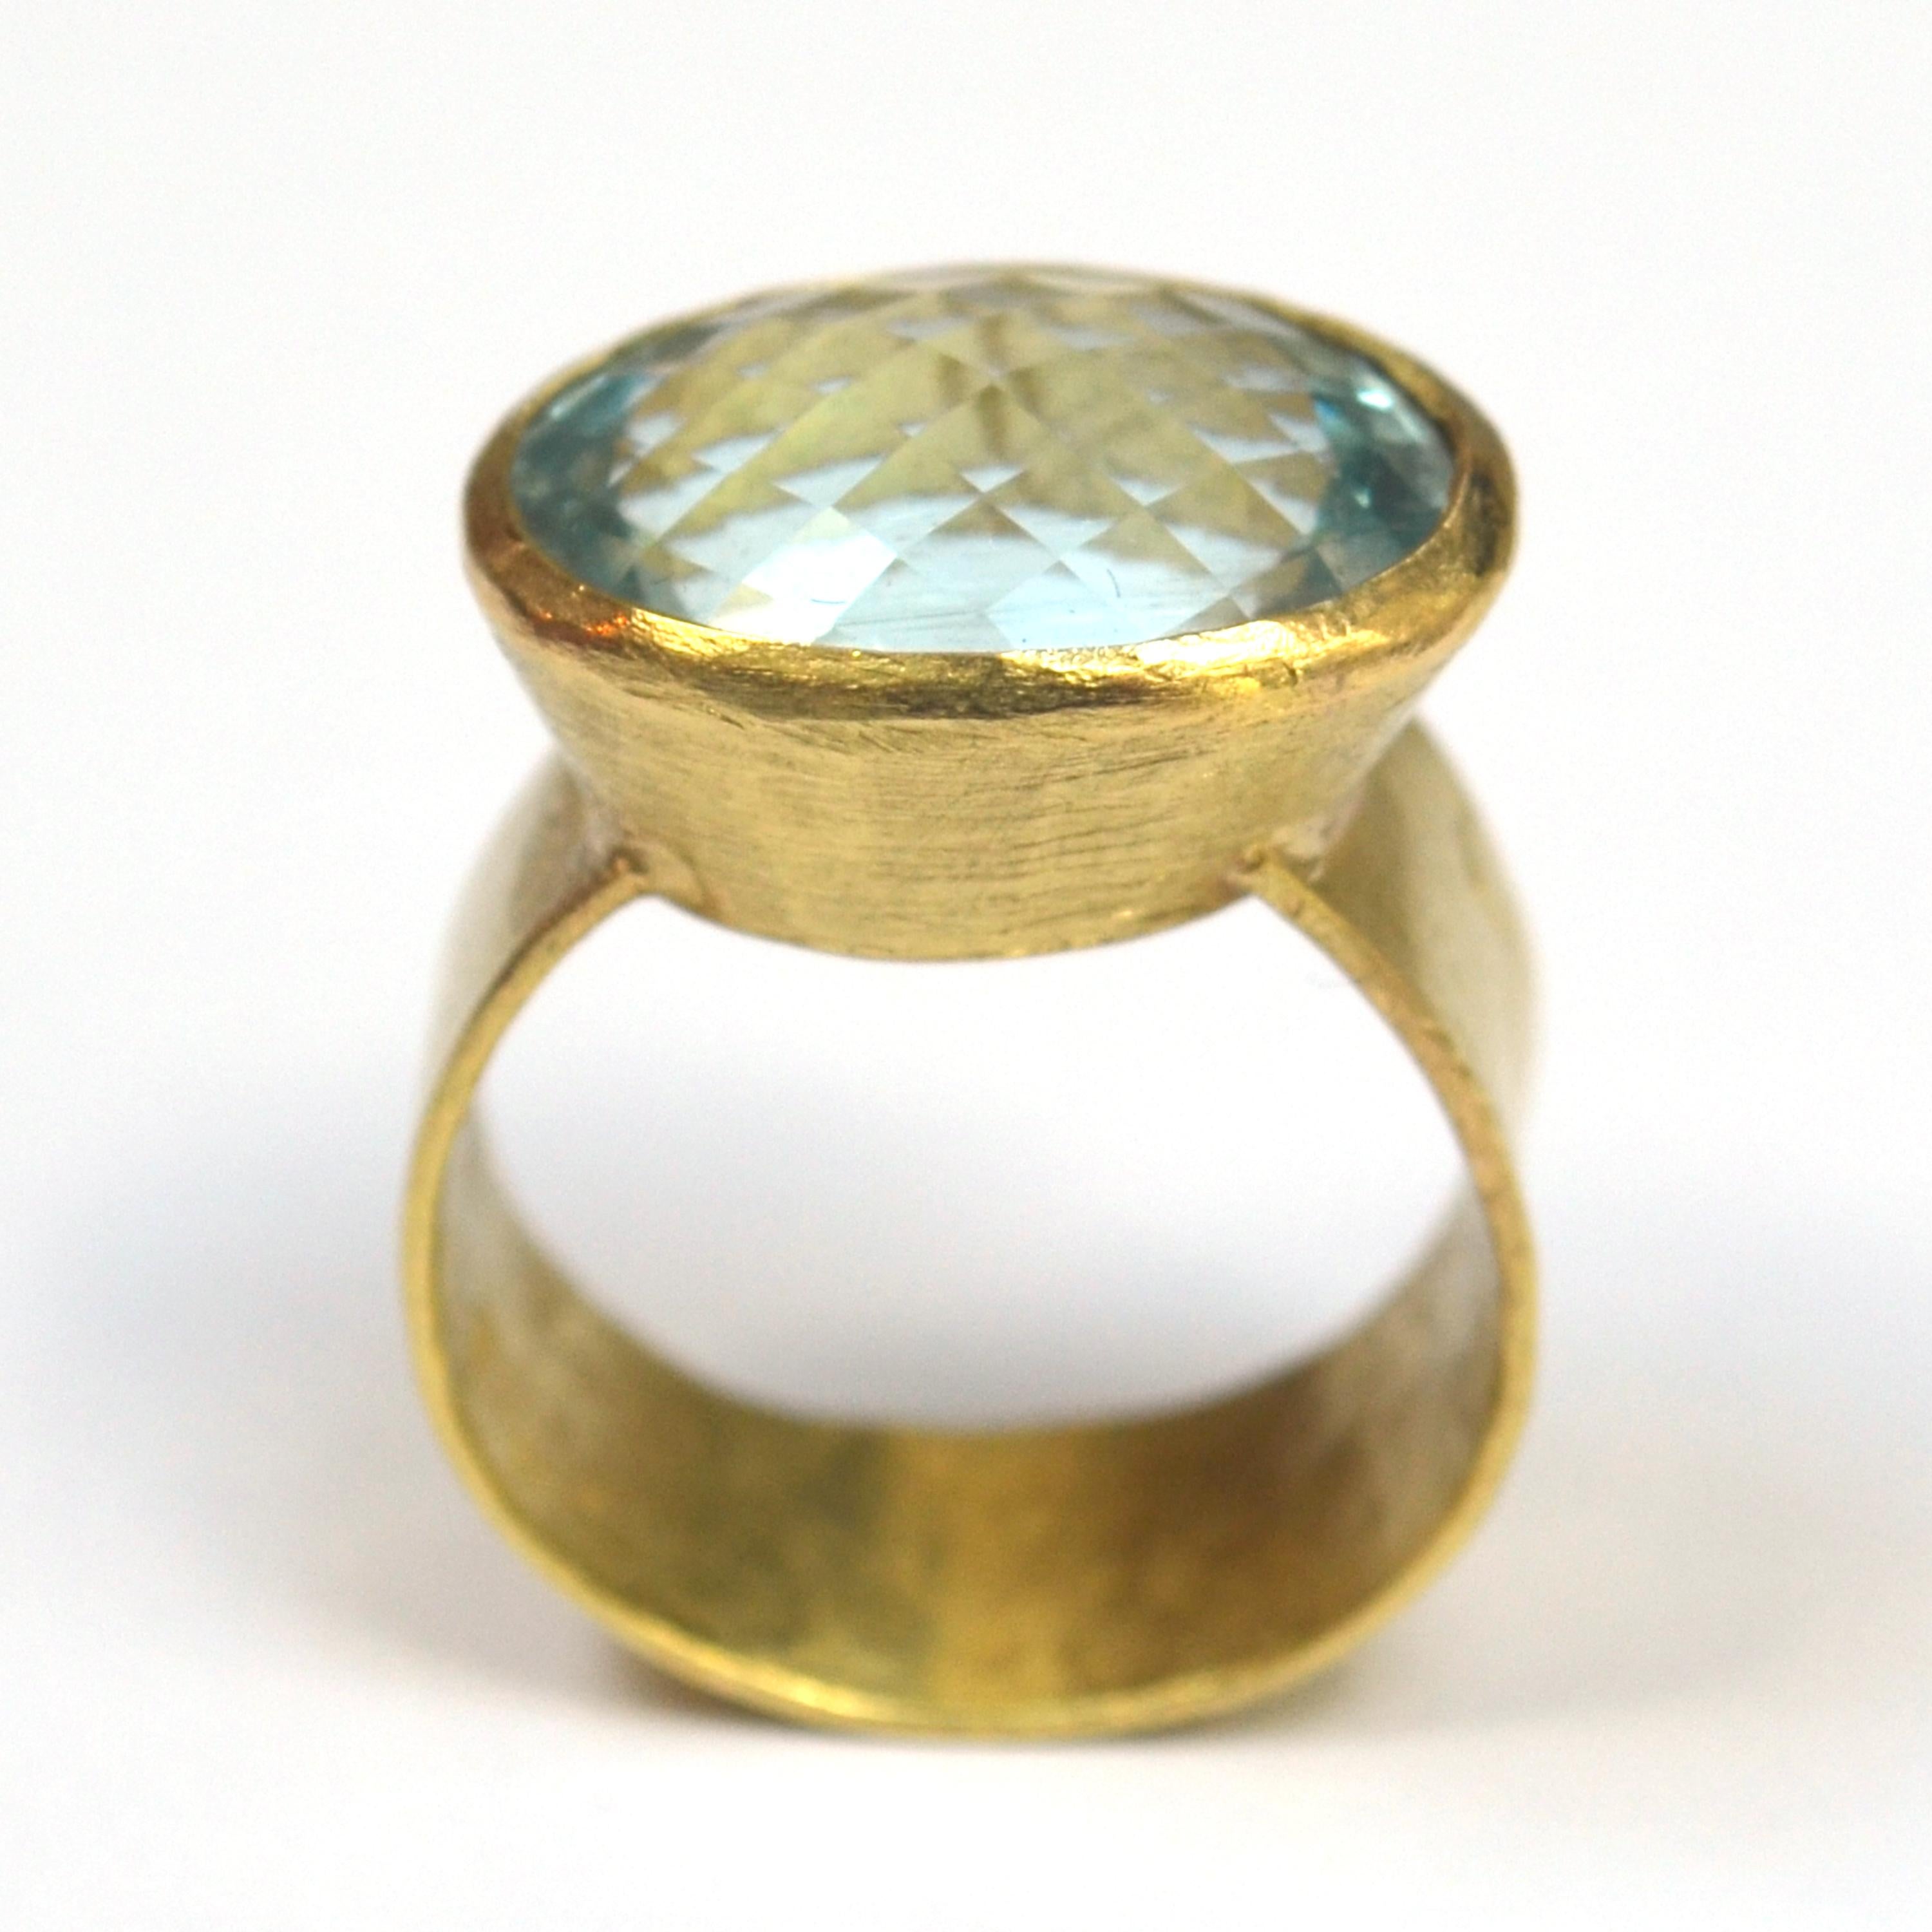 Oval Cut Chequerboard Cut Aquamarine Wide 18k Gold Cocktail Ring Handmade by Disa Allsopp